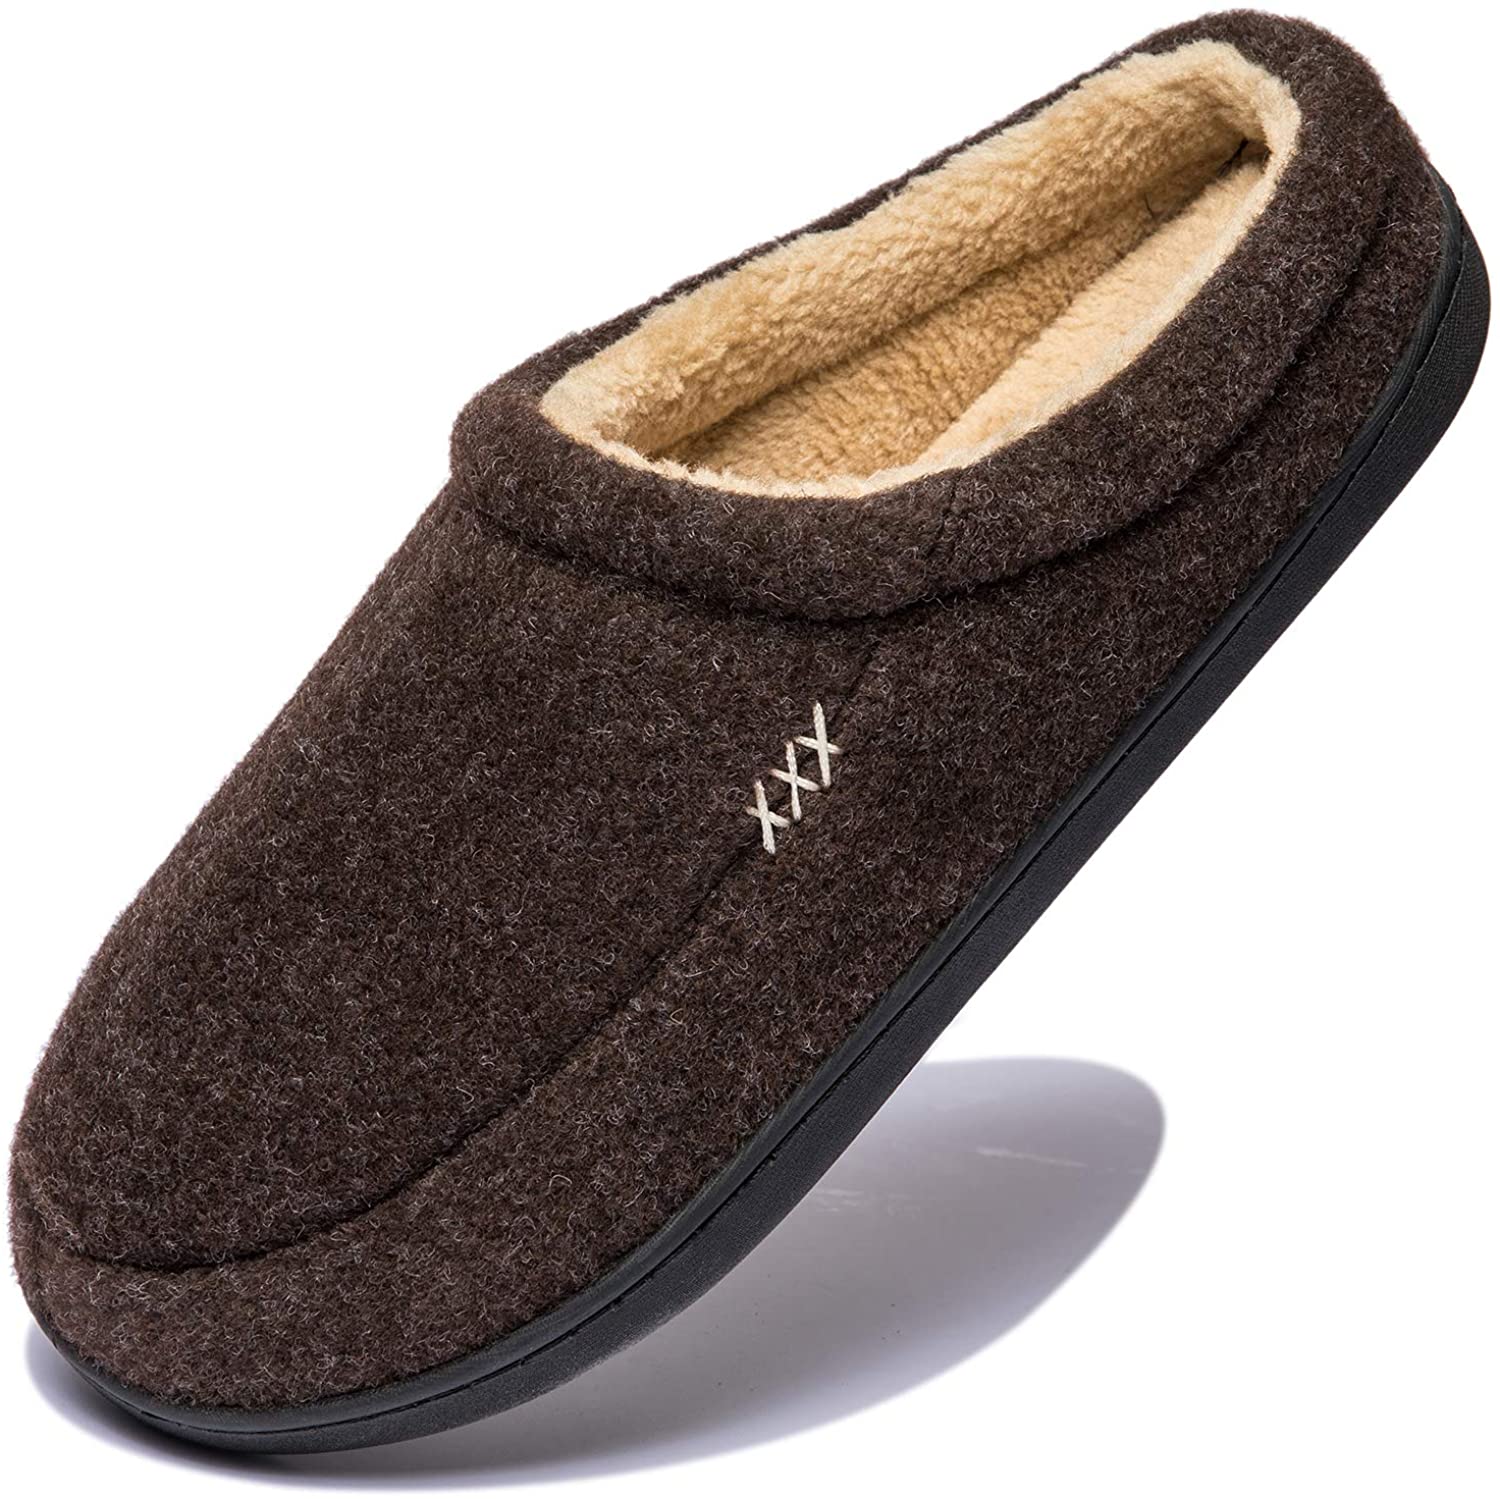 NewDenBer Men's Cozy Memory Foam Slippers Soft Slip on Indoor Outdoor Clog House Shoes 